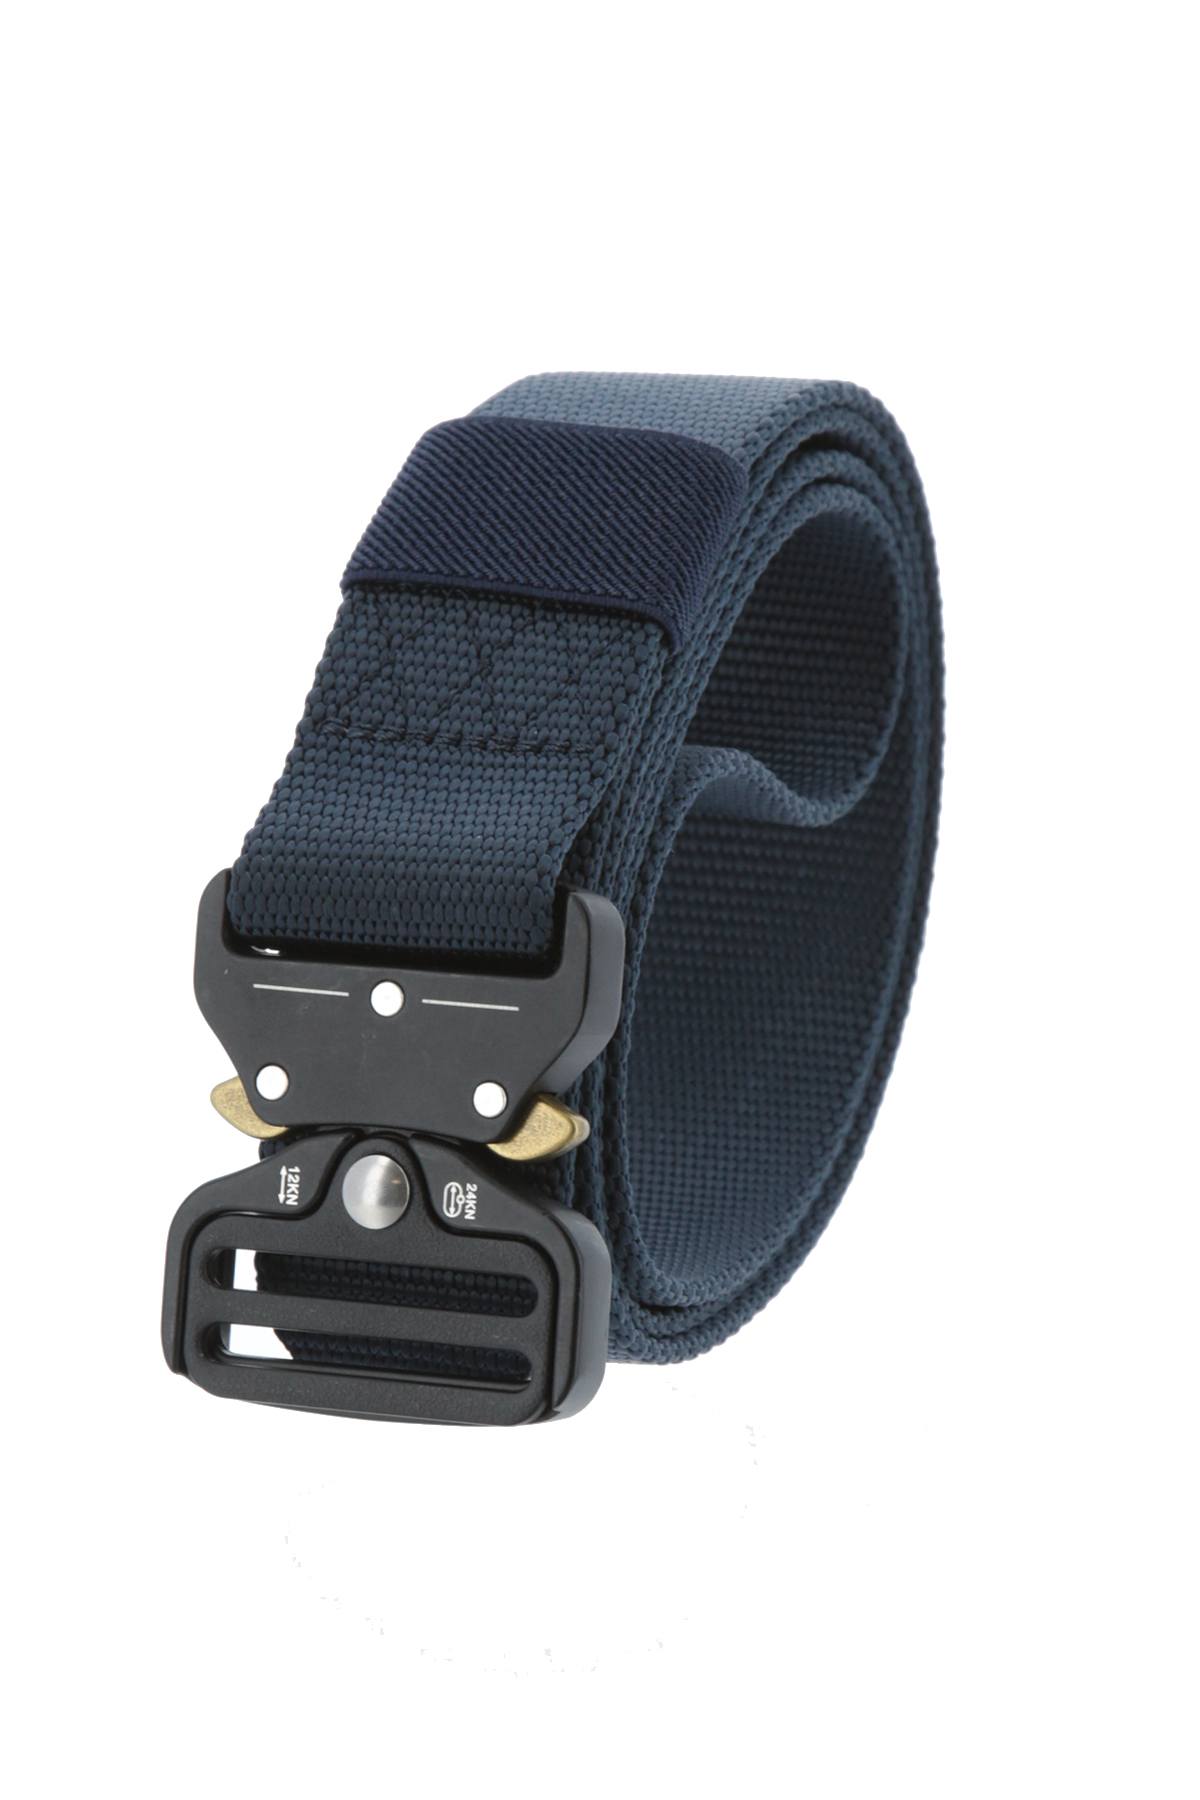 Blue Military Style Tactical Belt Nylon Belt with Heavy-Duty Quick-Release Metal Buckle